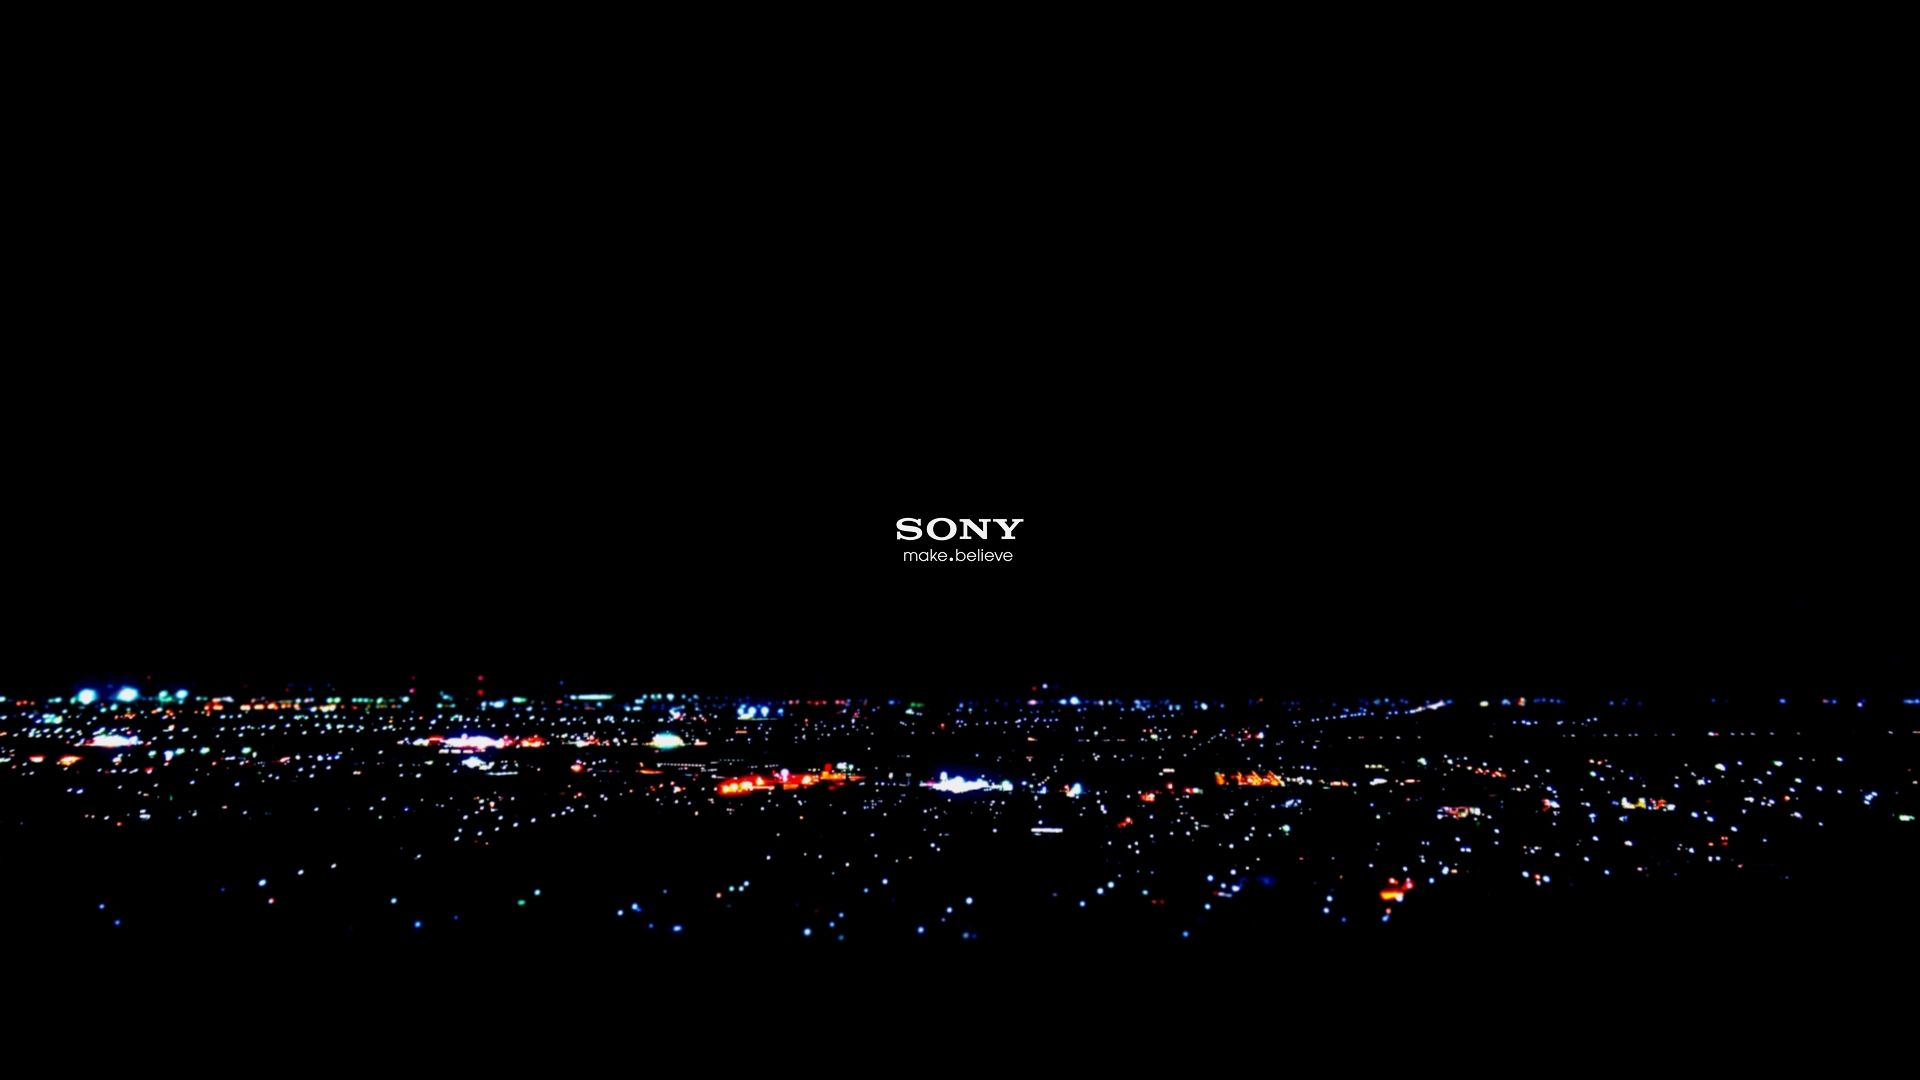 Download Latest HD Wallpaper of, Brands, Free Sony